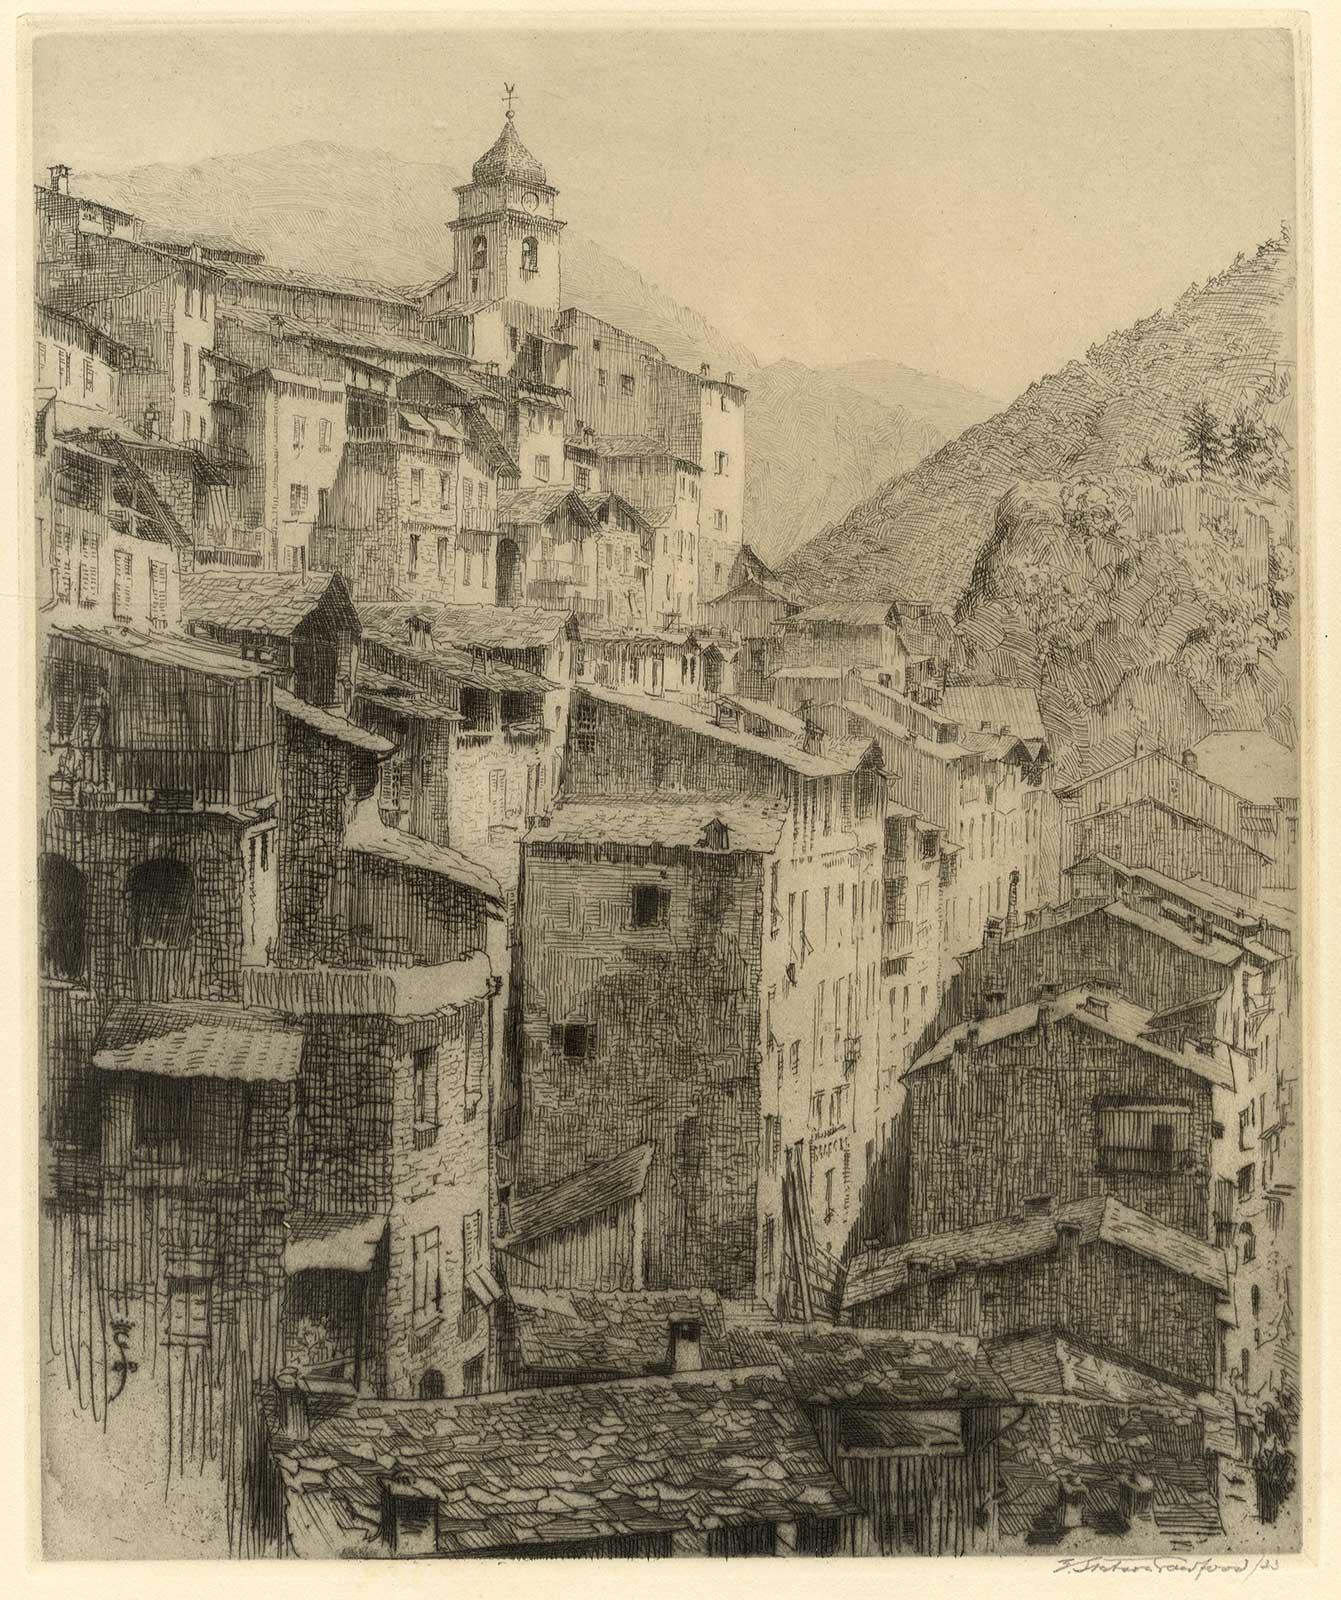 Saorge Village (Alpes-Maritimes area in southeastern France) - Brown Landscape Print by Earl Stetson Crawford